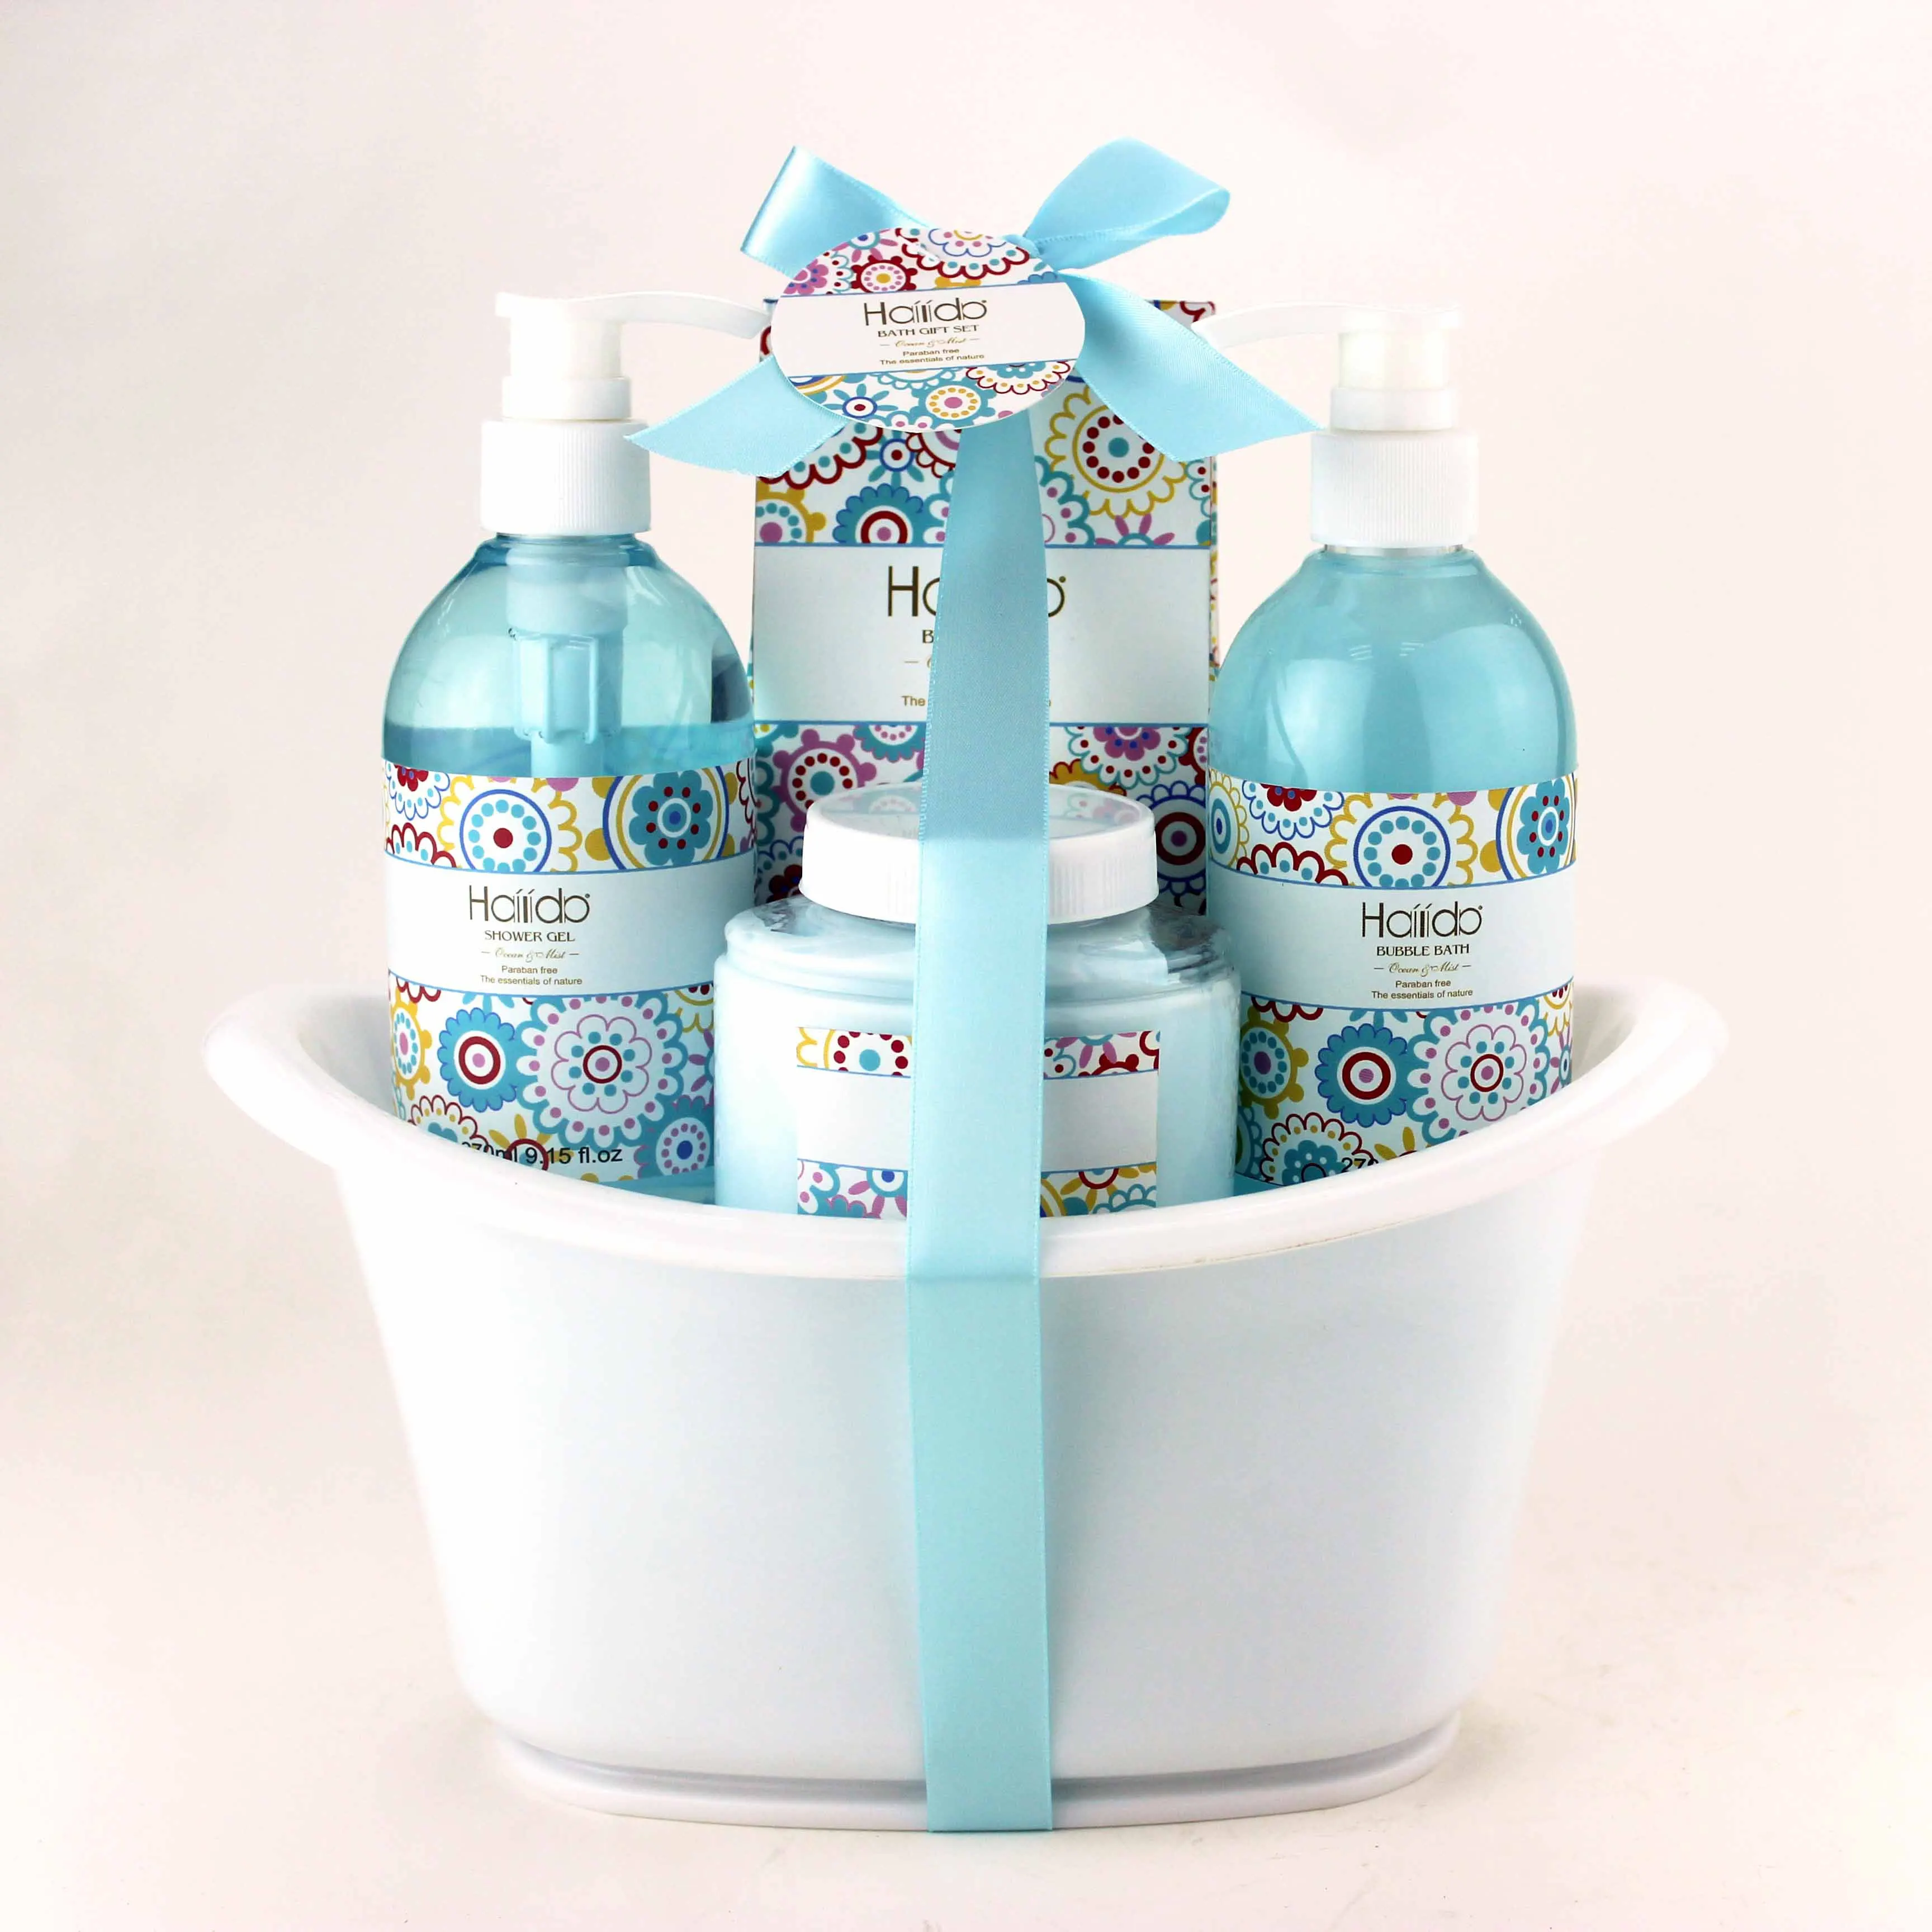 
Natural Luxurious Body Spa Bathroom Aromatic Shower Gel Body Lotion Bath Gift Sets 